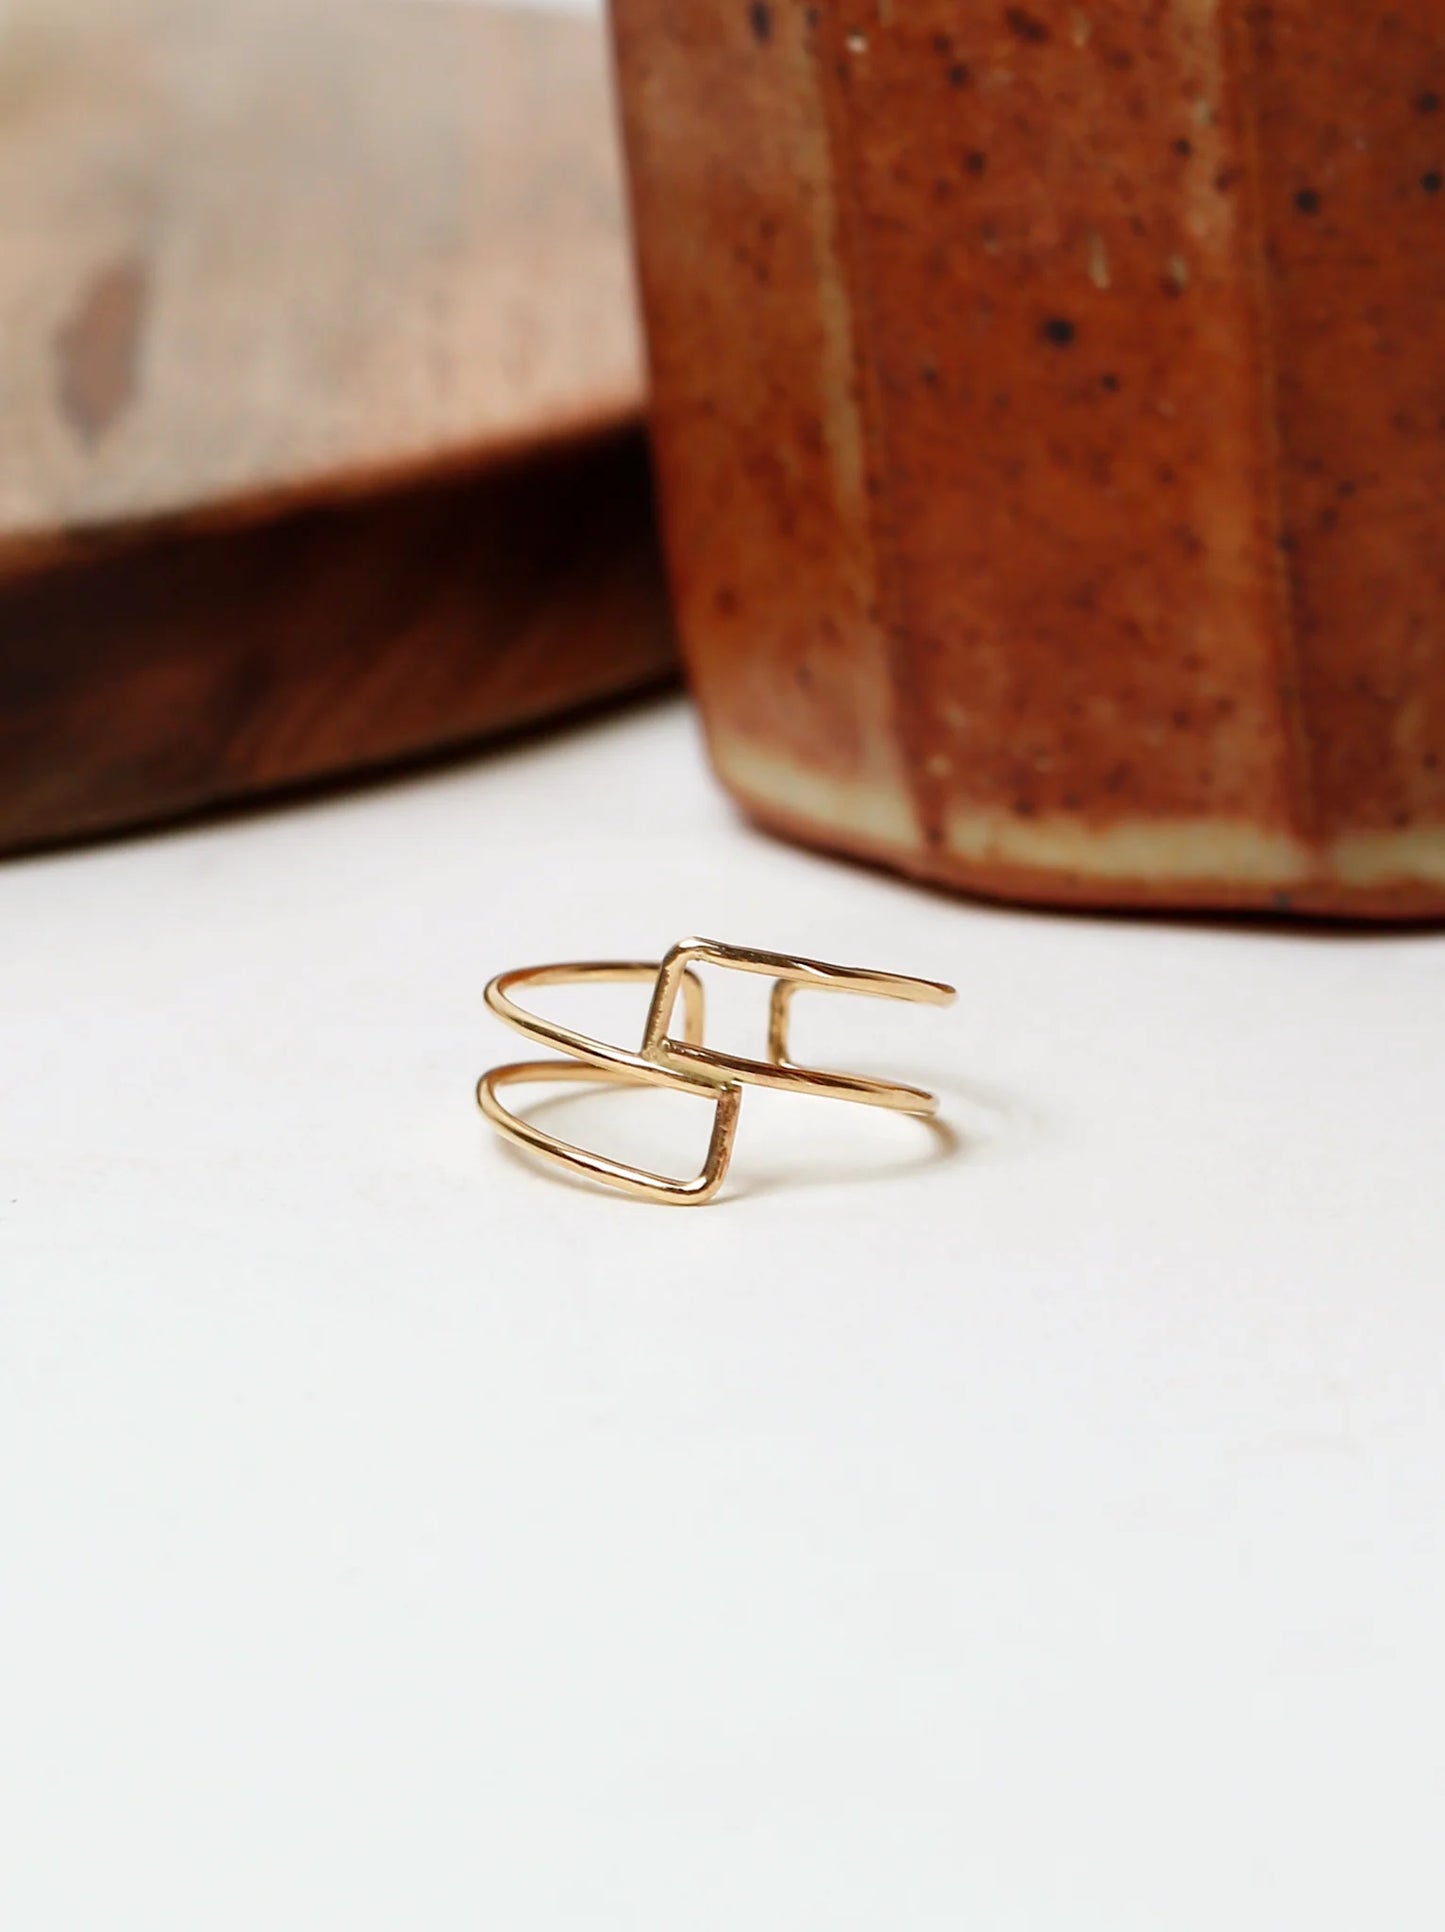 Meander Ring by Able